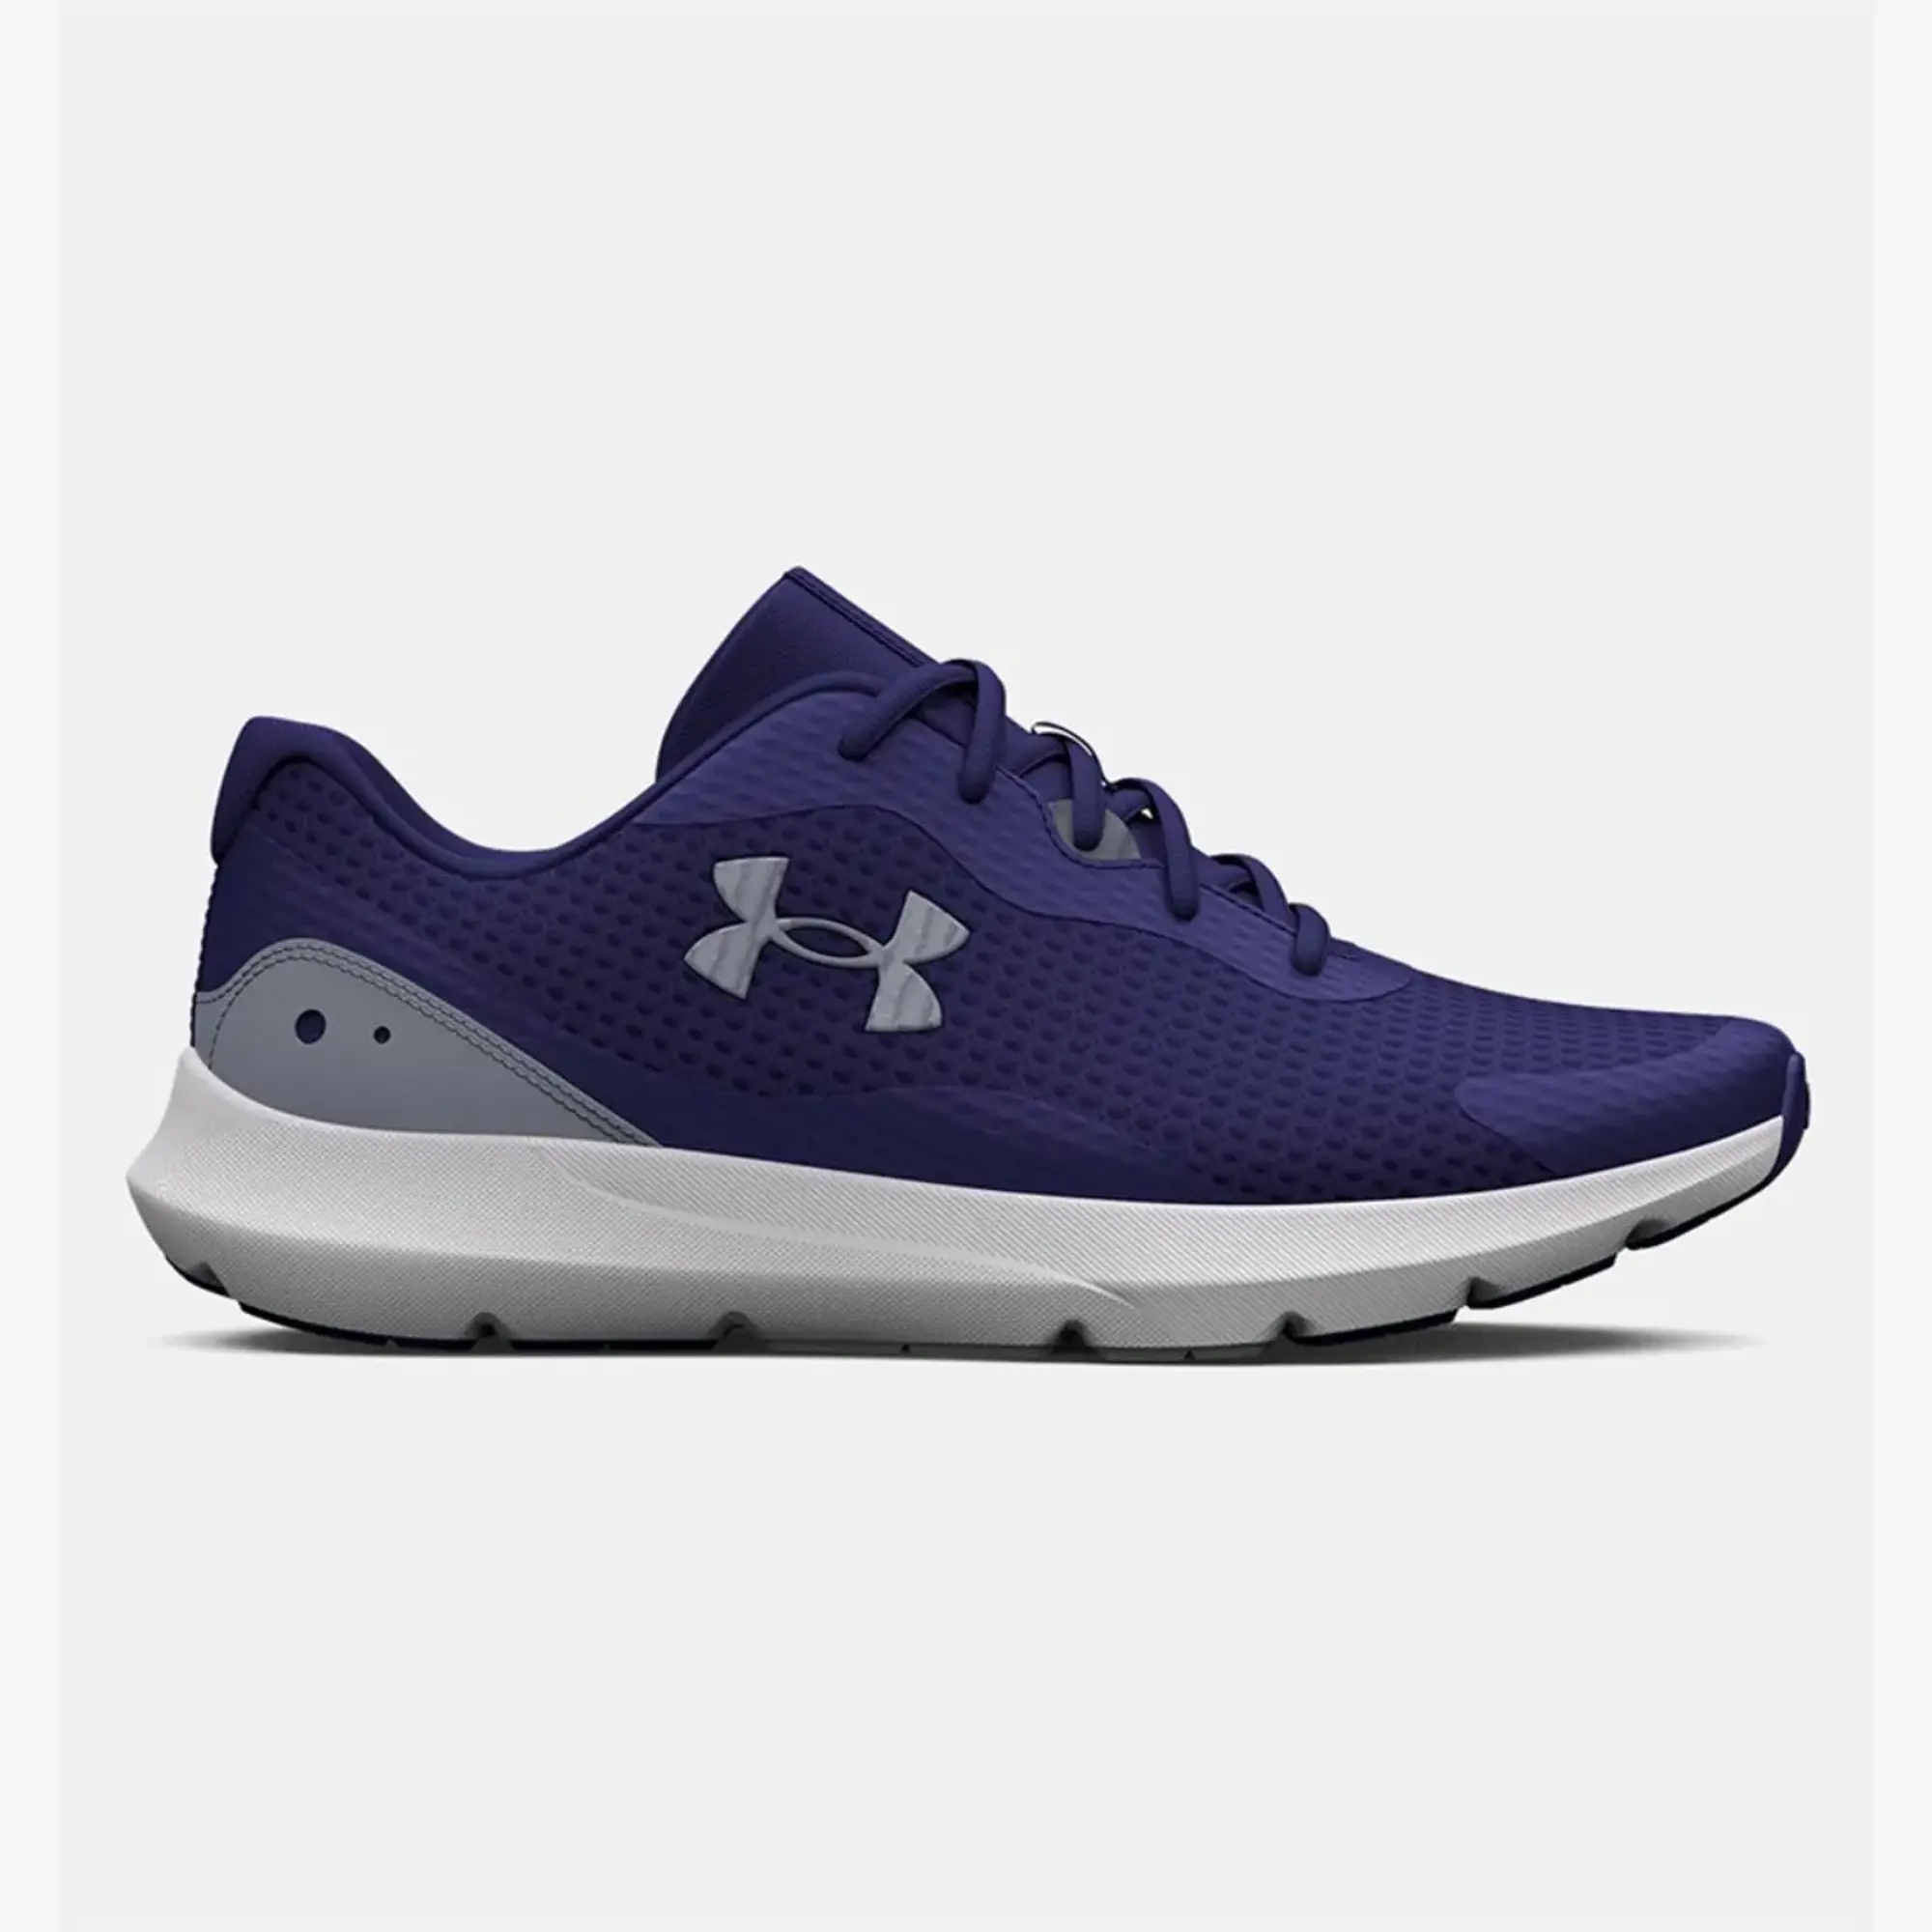 Under Armour Surge 3 Mens Running Shoes - Blue